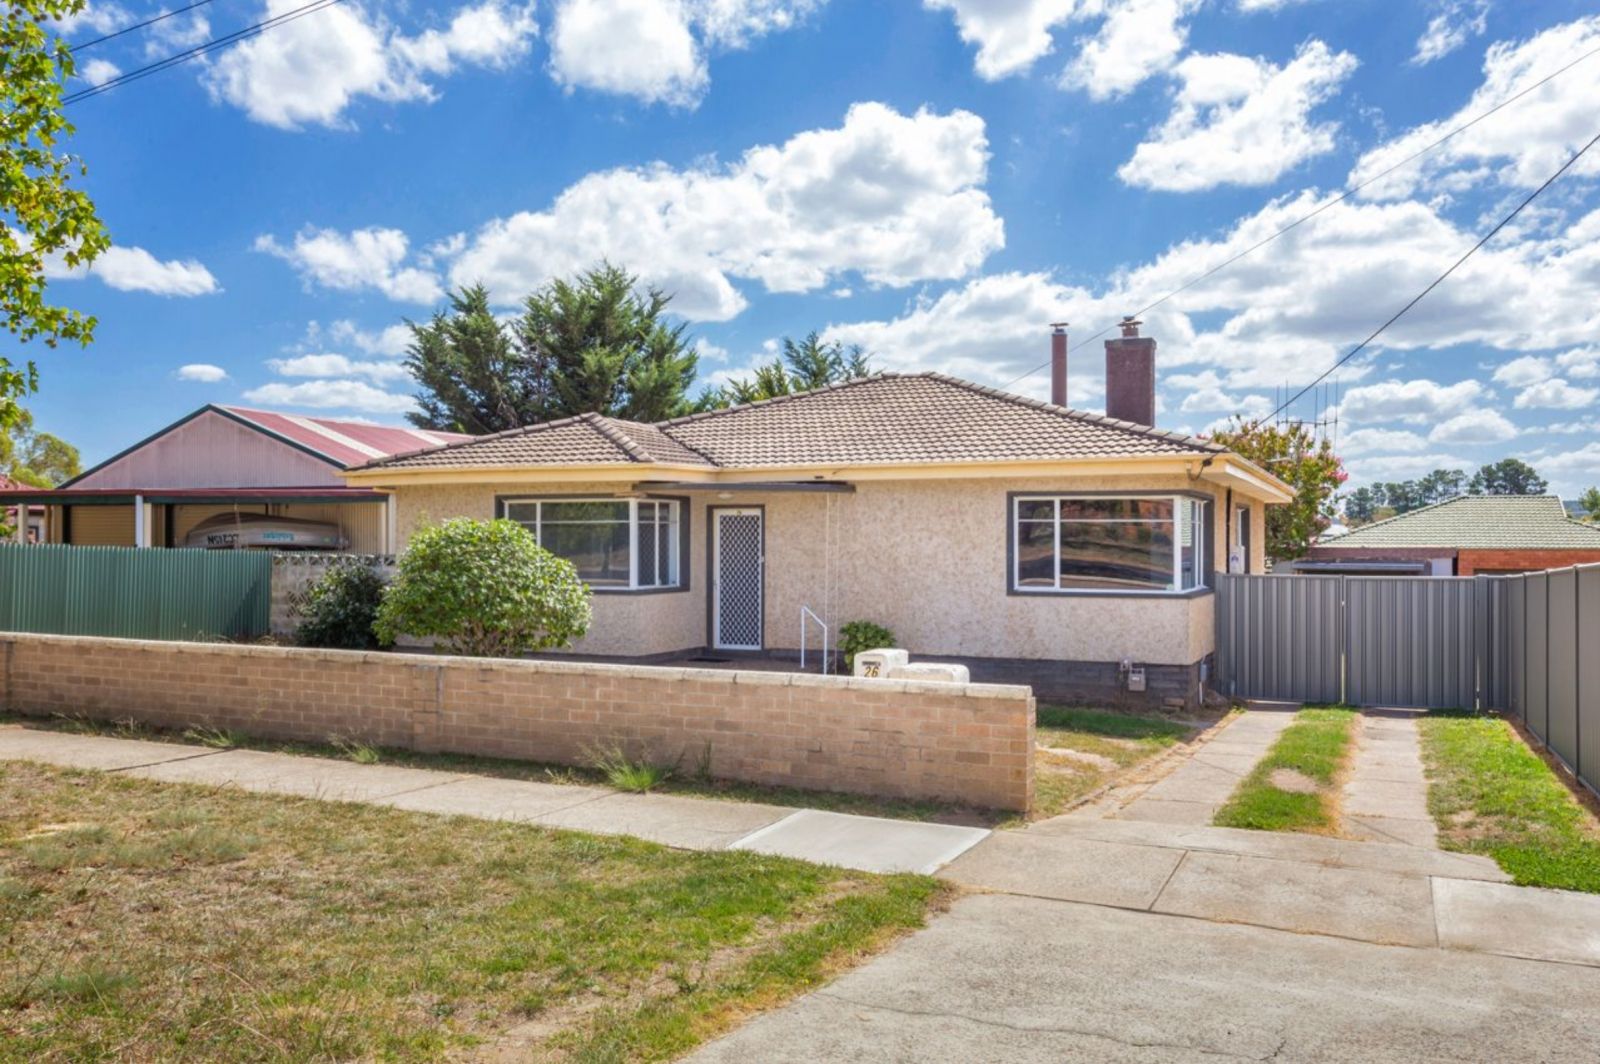 3 bedrooms House in 26 Ford Street QUEANBEYAN EAST NSW, 2620